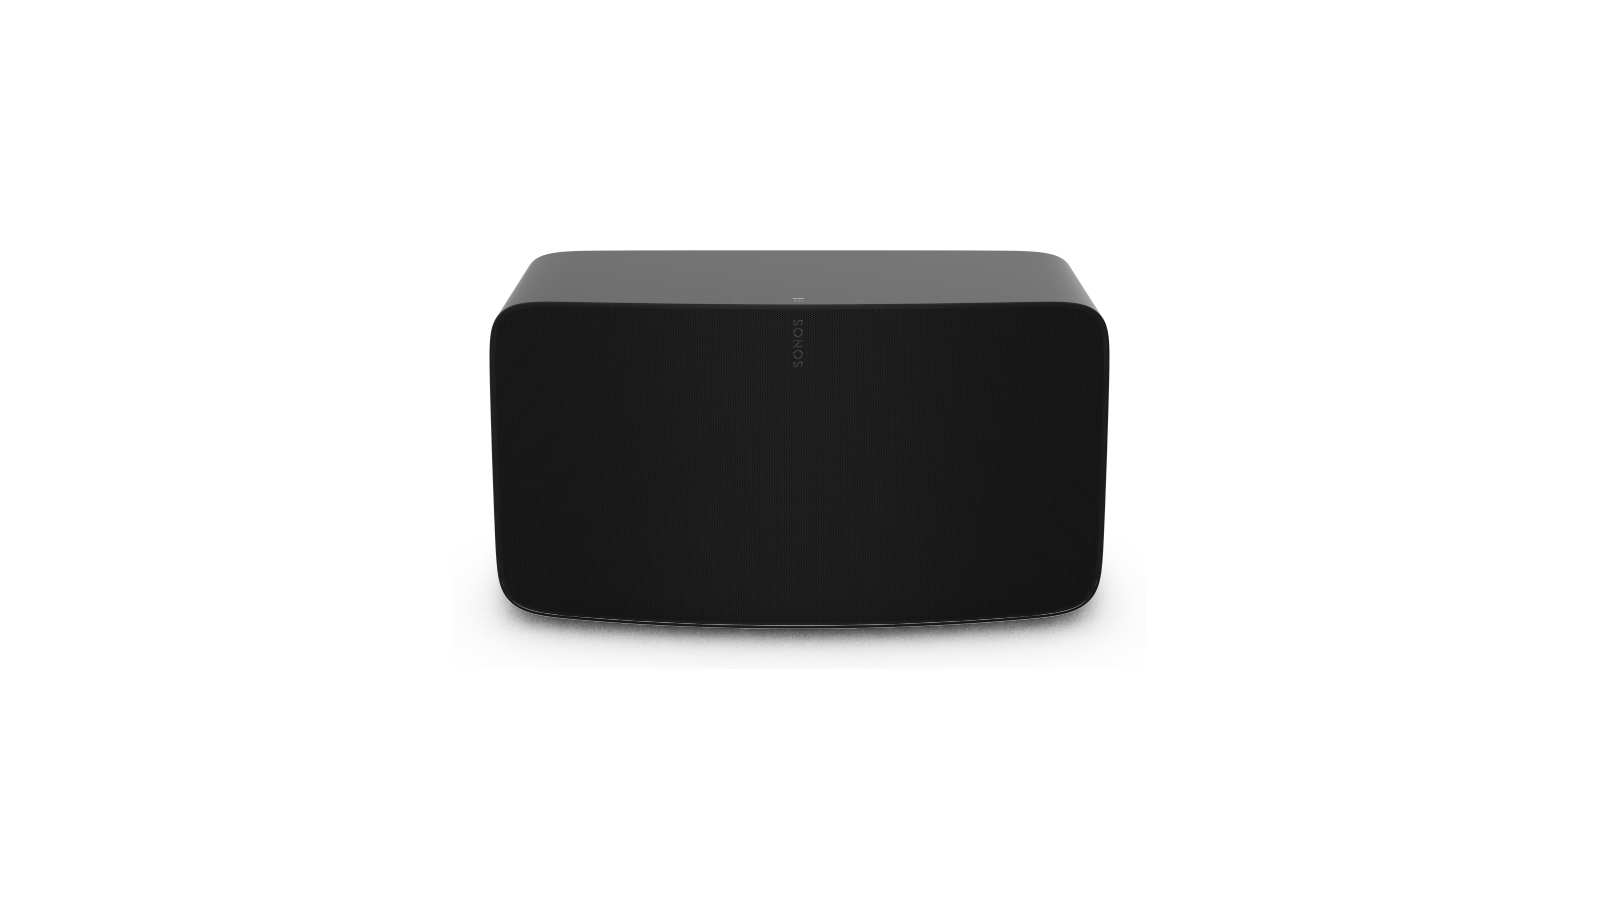 A product image of a black Sonos Five speaker shown from the front against a white background.